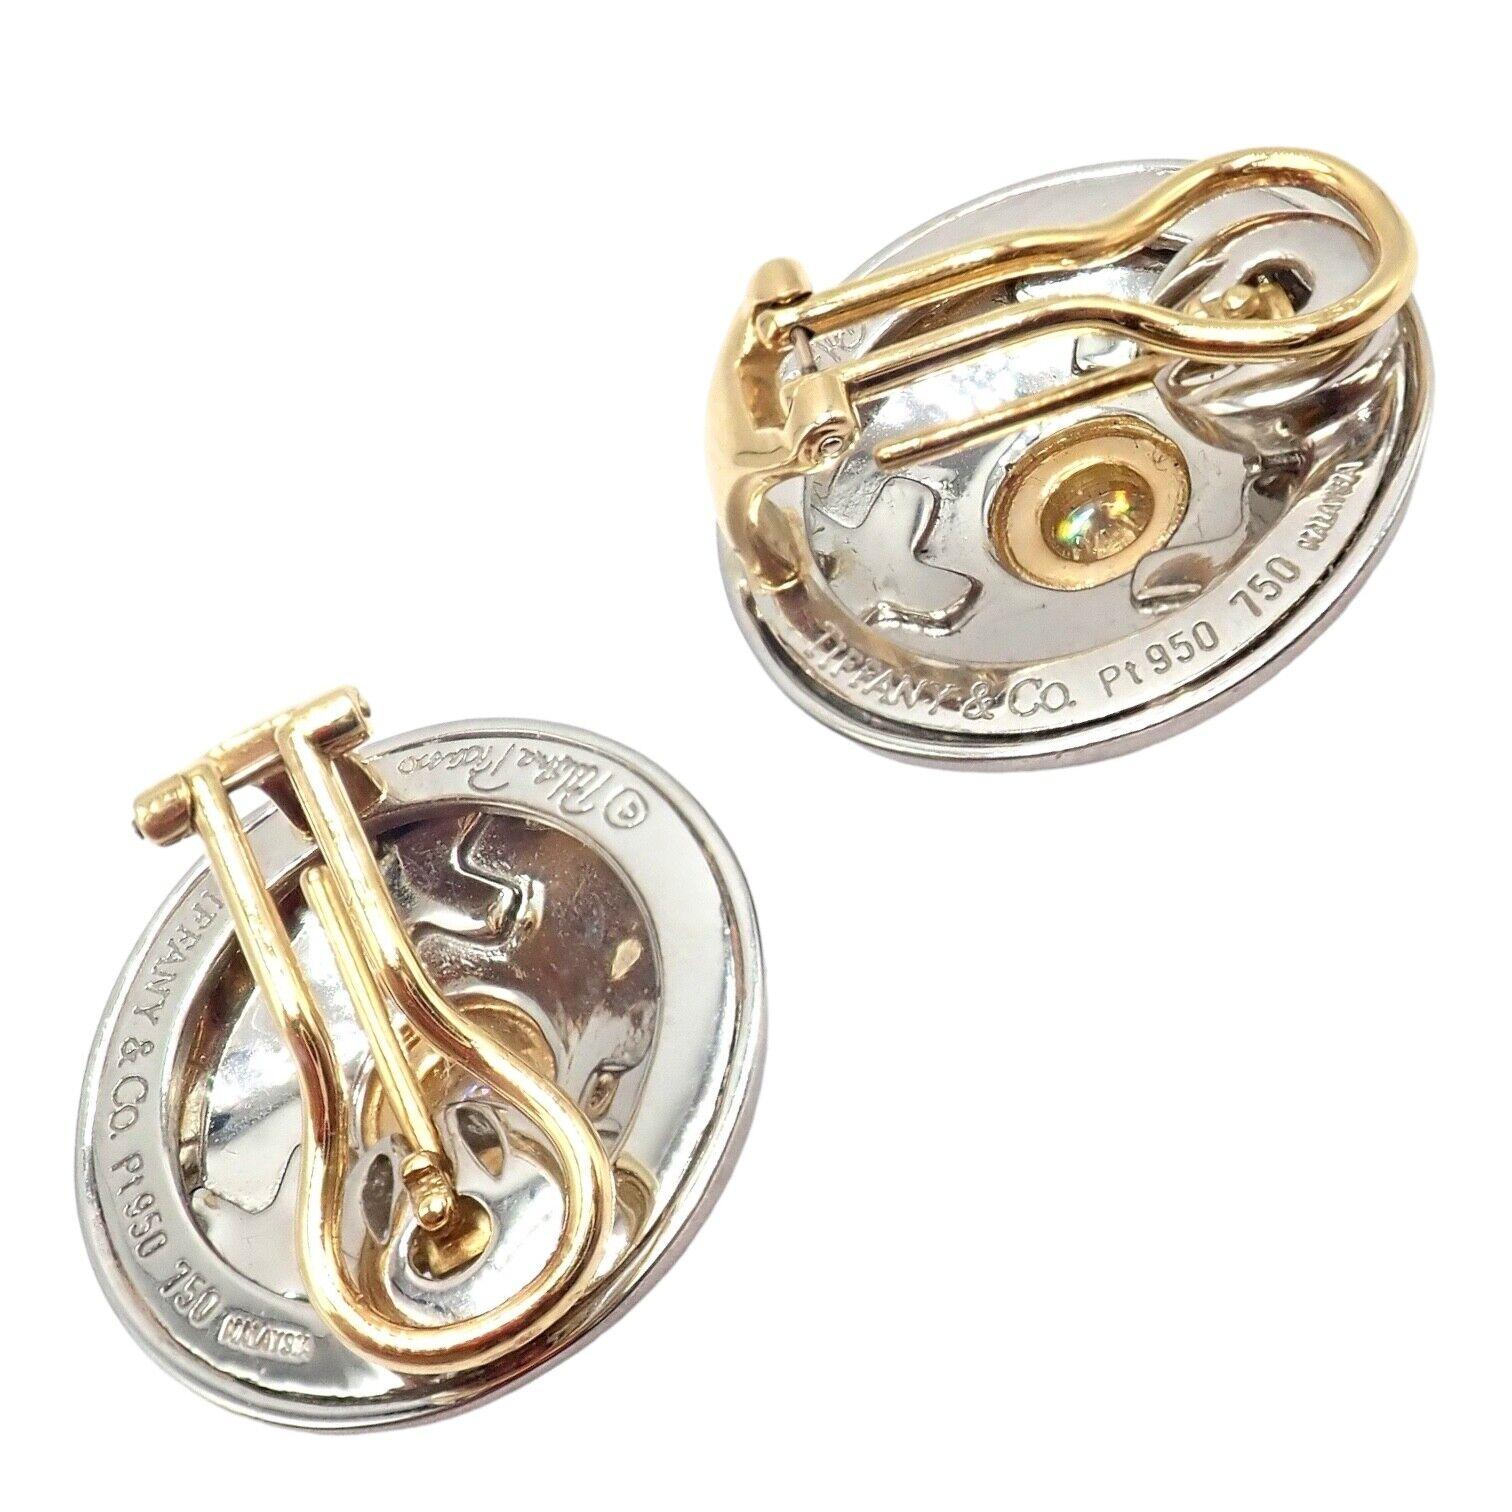 Tiffany & Co Picasso Picasso Diamond Signature X Platinum Yellow Gold Earrings In Excellent Condition For Sale In Holland, PA